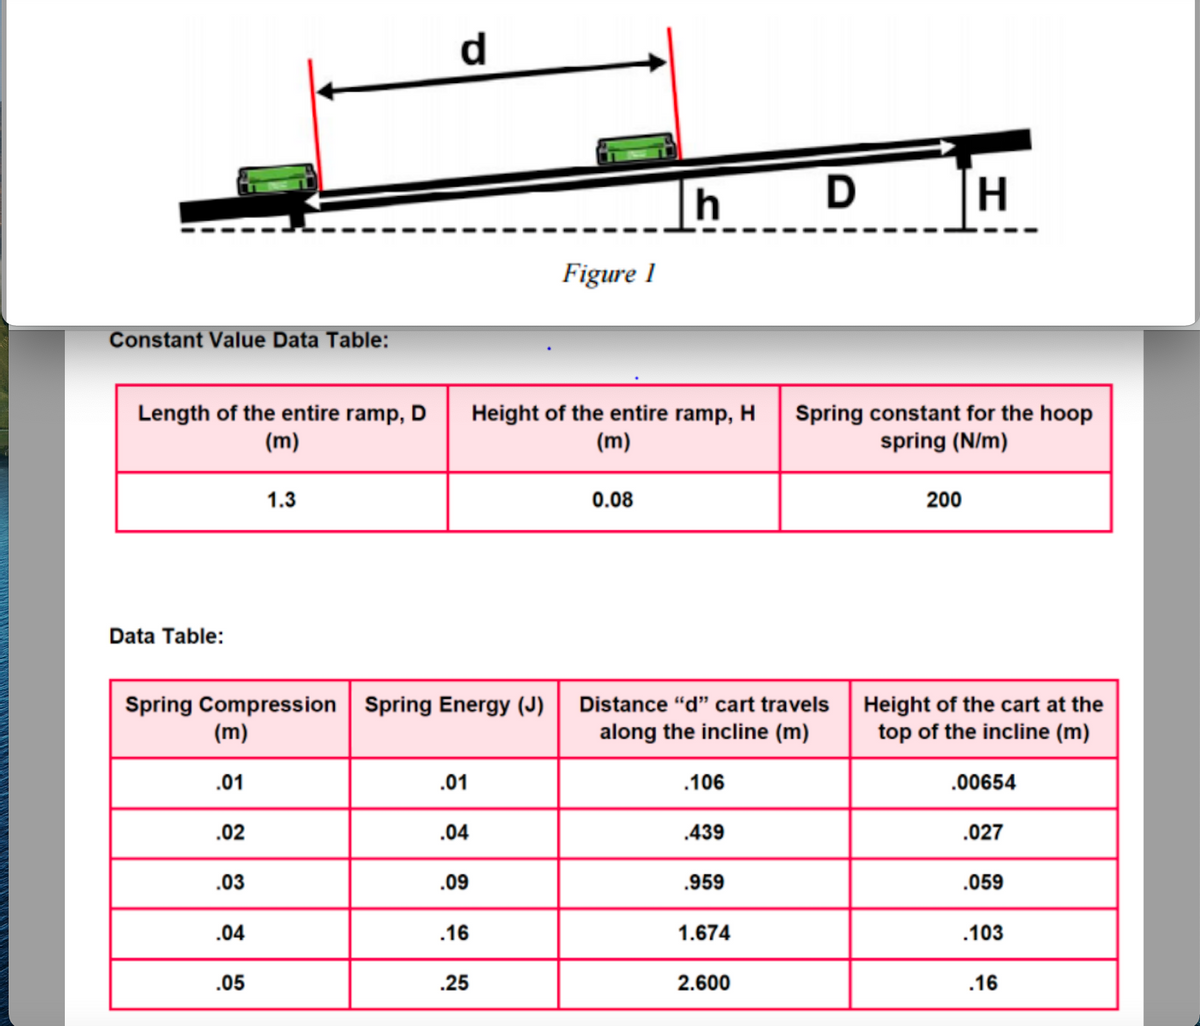 d
H
Figure 1
Constant Value Data Table:
Length of the entire ramp, D
(m)
Height of the entire ramp, H
(m)
Spring constant for the hoop
spring (N/m)
1.3
0.08
200
Data Table:
Spring Compression Spring Energy (J)
Distance "d" cart travels
Height of the cart at the
top of the incline (m)
(m)
along the incline (m)
.01
.01
.106
.00654
.02
.04
.439
.027
.03
.09
.959
.059
.04
.16
1.674
.103
.05
.25
2.600
.16
